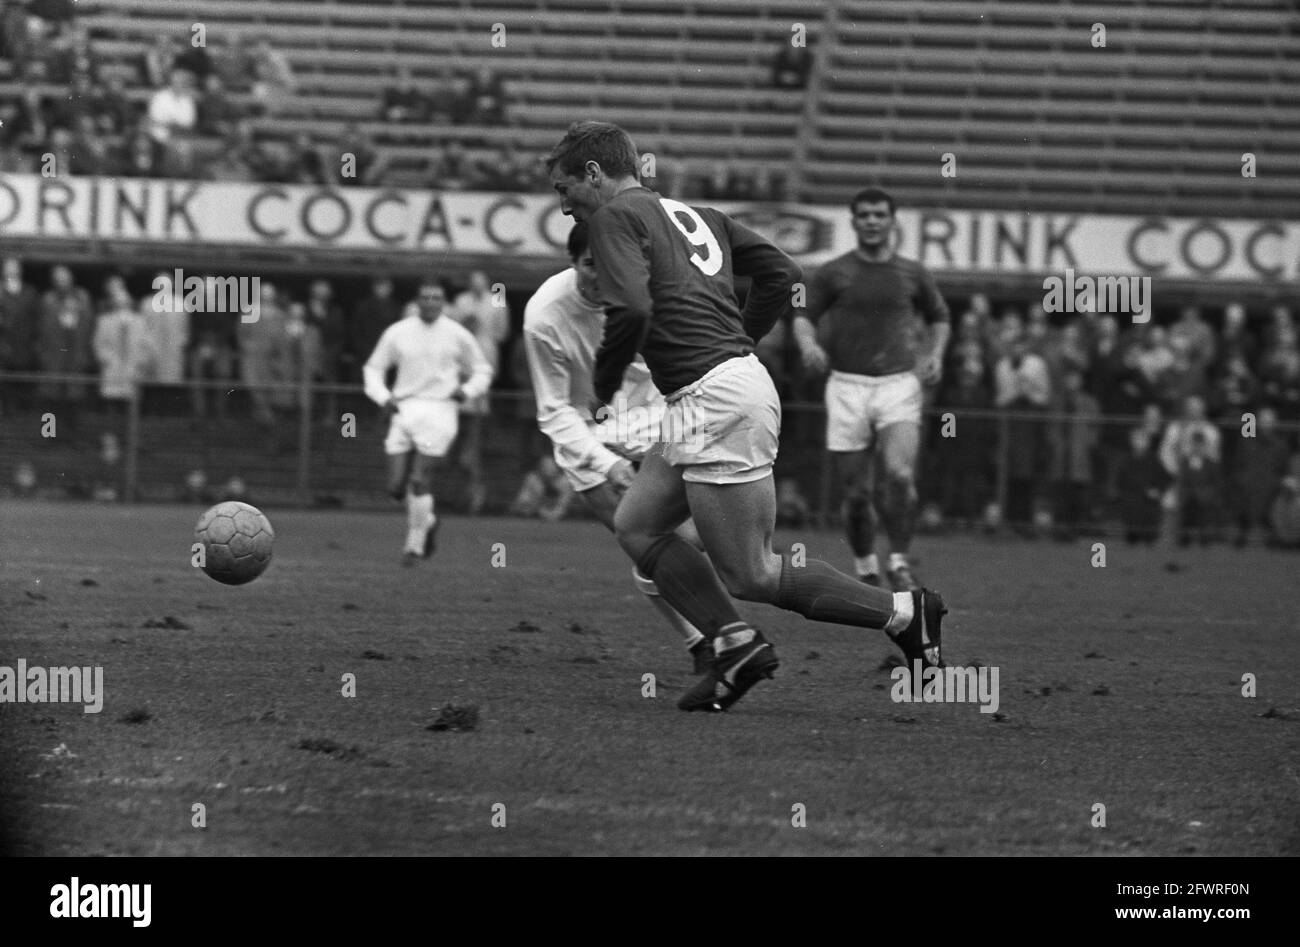 Dutch national team against Leeds United 5-2, game moment no. 15 H. Groot in action, May 5, 1965, elfin football, sport, soccer, The Netherlands, 20th century press agency photo, news to remember, documentary, historic photography 1945-1990, visual stories, human history of the Twentieth Century, capturing moments in time Stock Photo